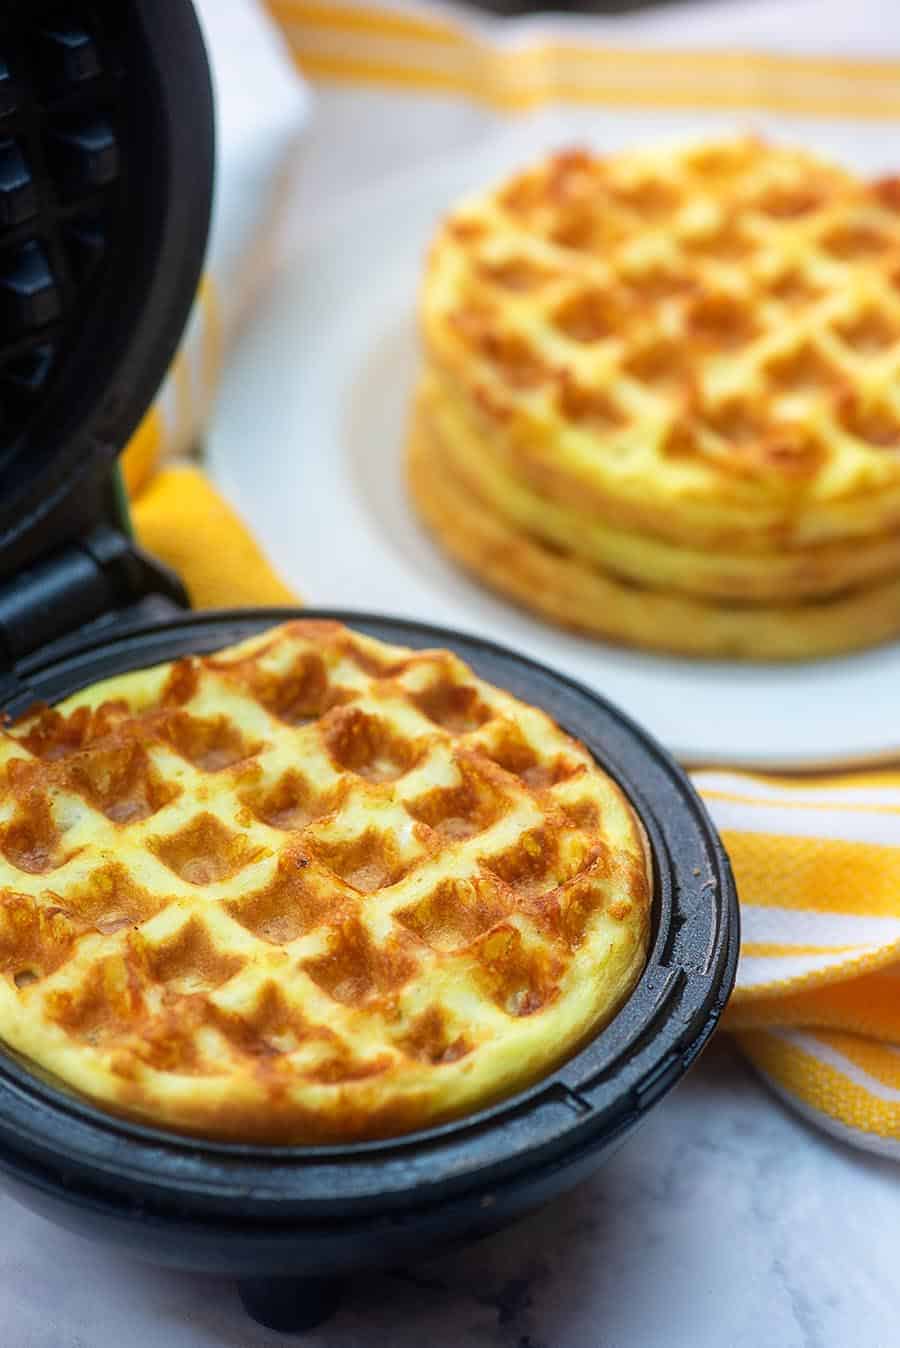 Waffle iron with a cooked chaffle in it